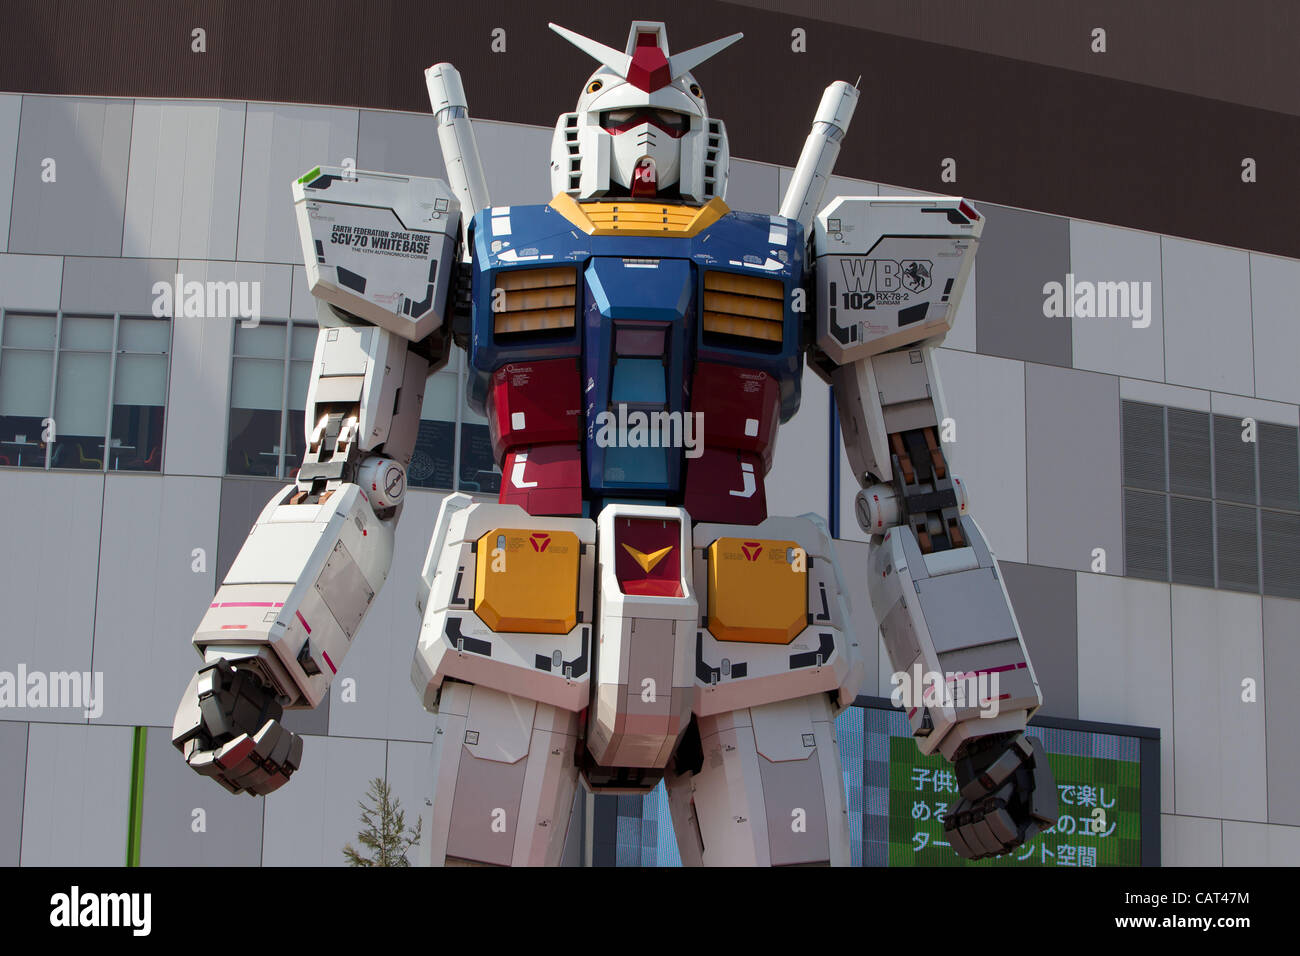 April 18, 2012, Tokyo, Japan - A 18-meter high full-scale model of the  popular Gundam robot from the Japanese anime series created by Sunrise  studios, is on display in front of Diver